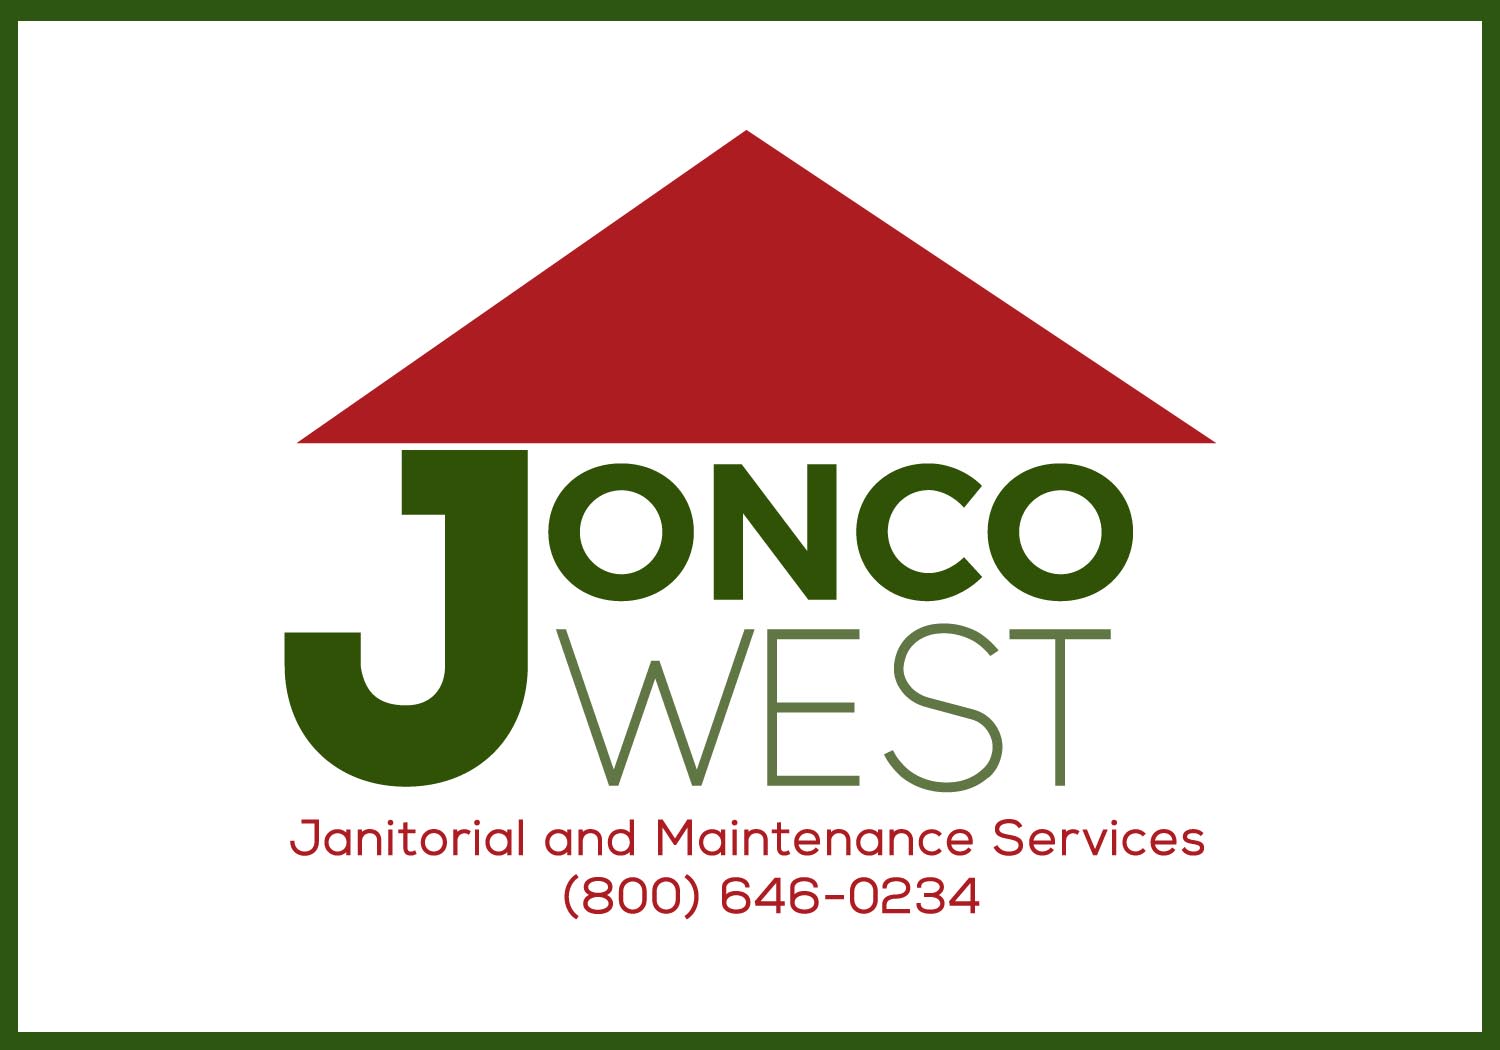 Janitorial and Maintenance Services